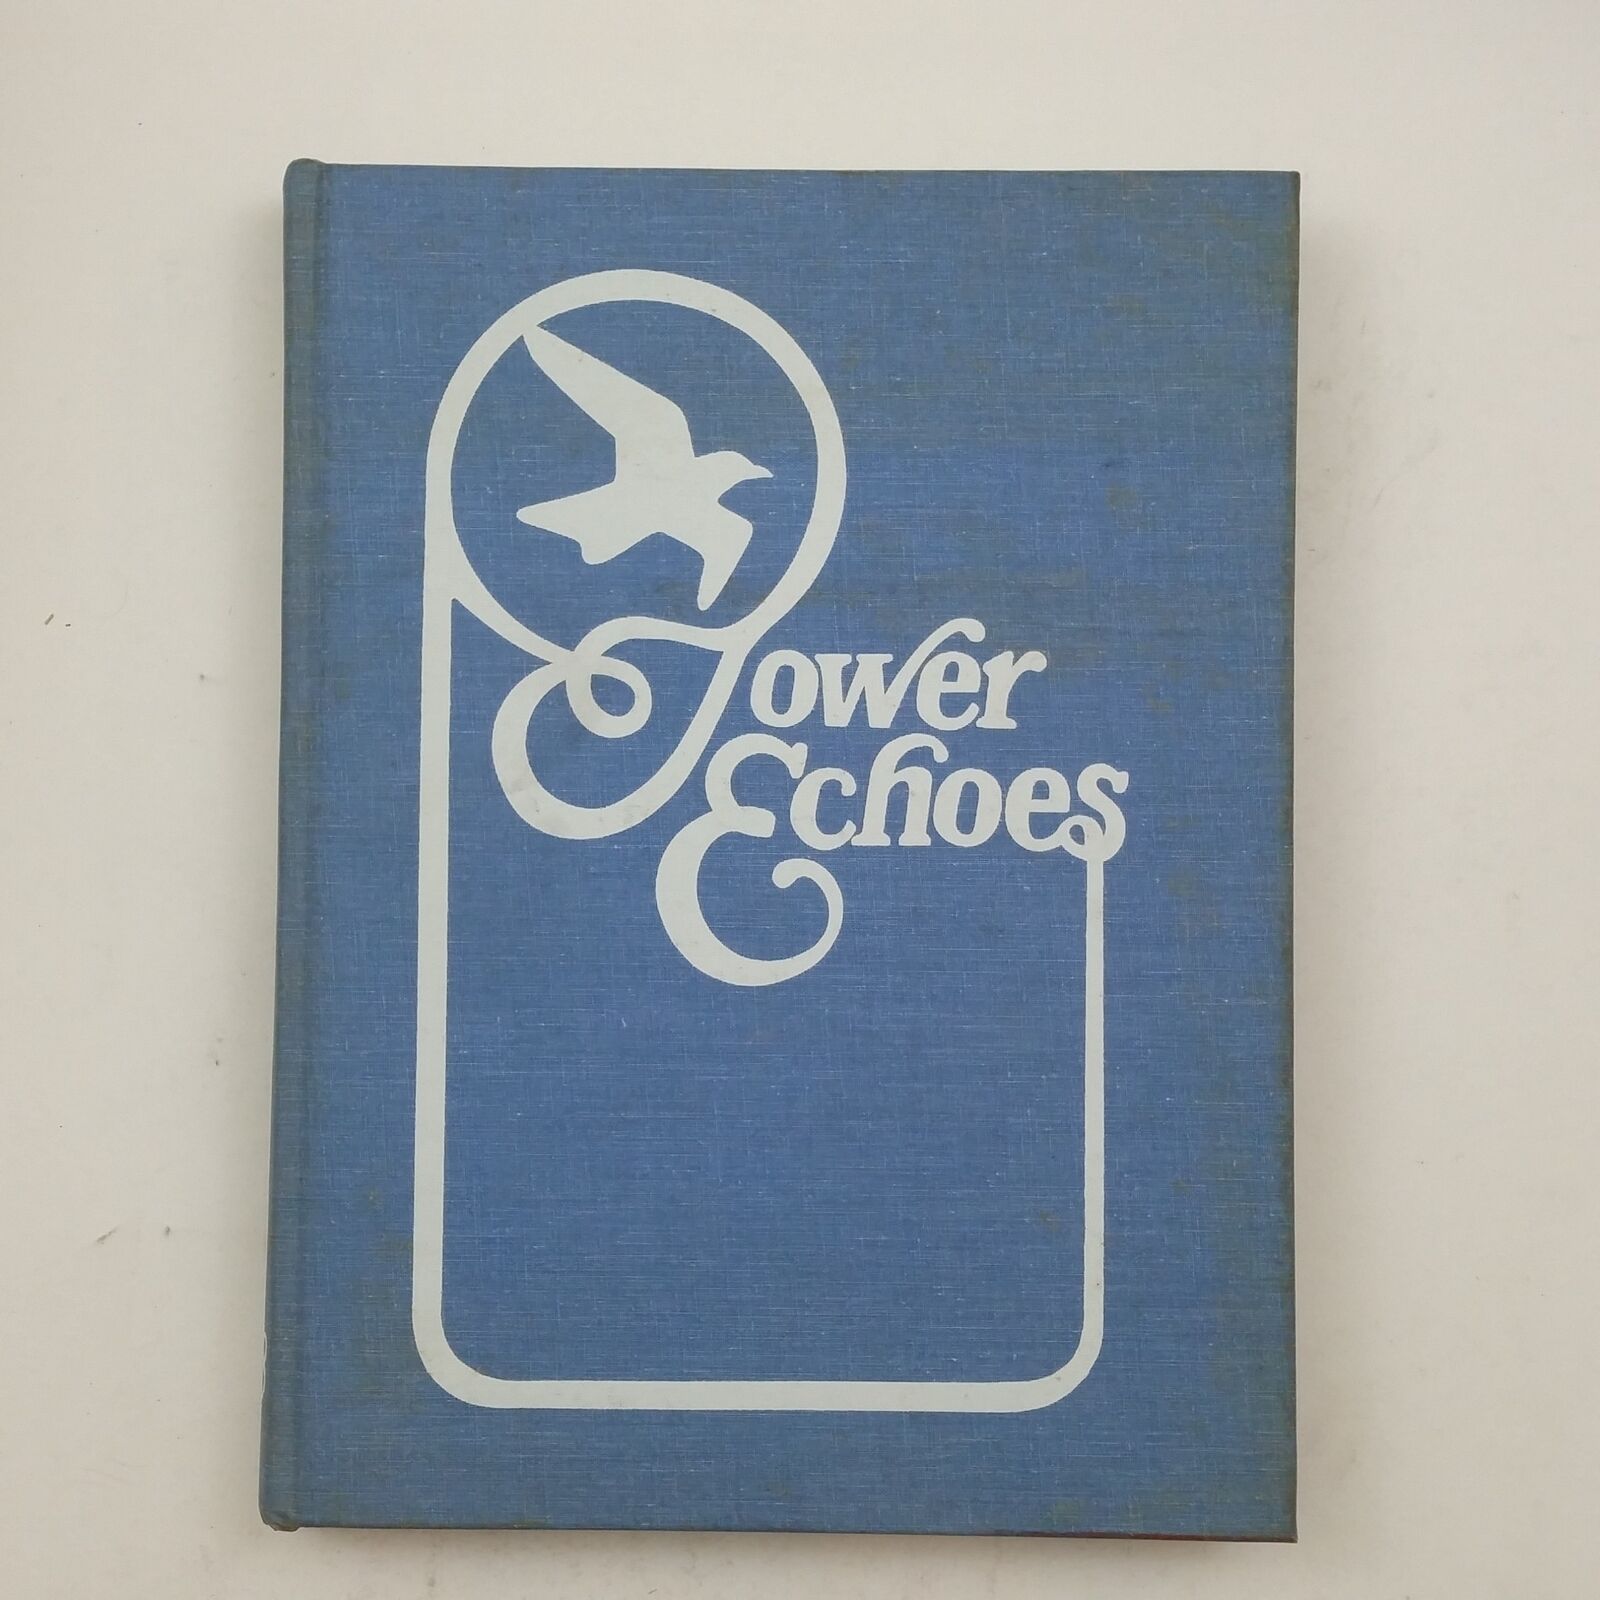 YEARBOOK 1978 Tower Echoes Towson State University Vol. 58 Towson, Maryland